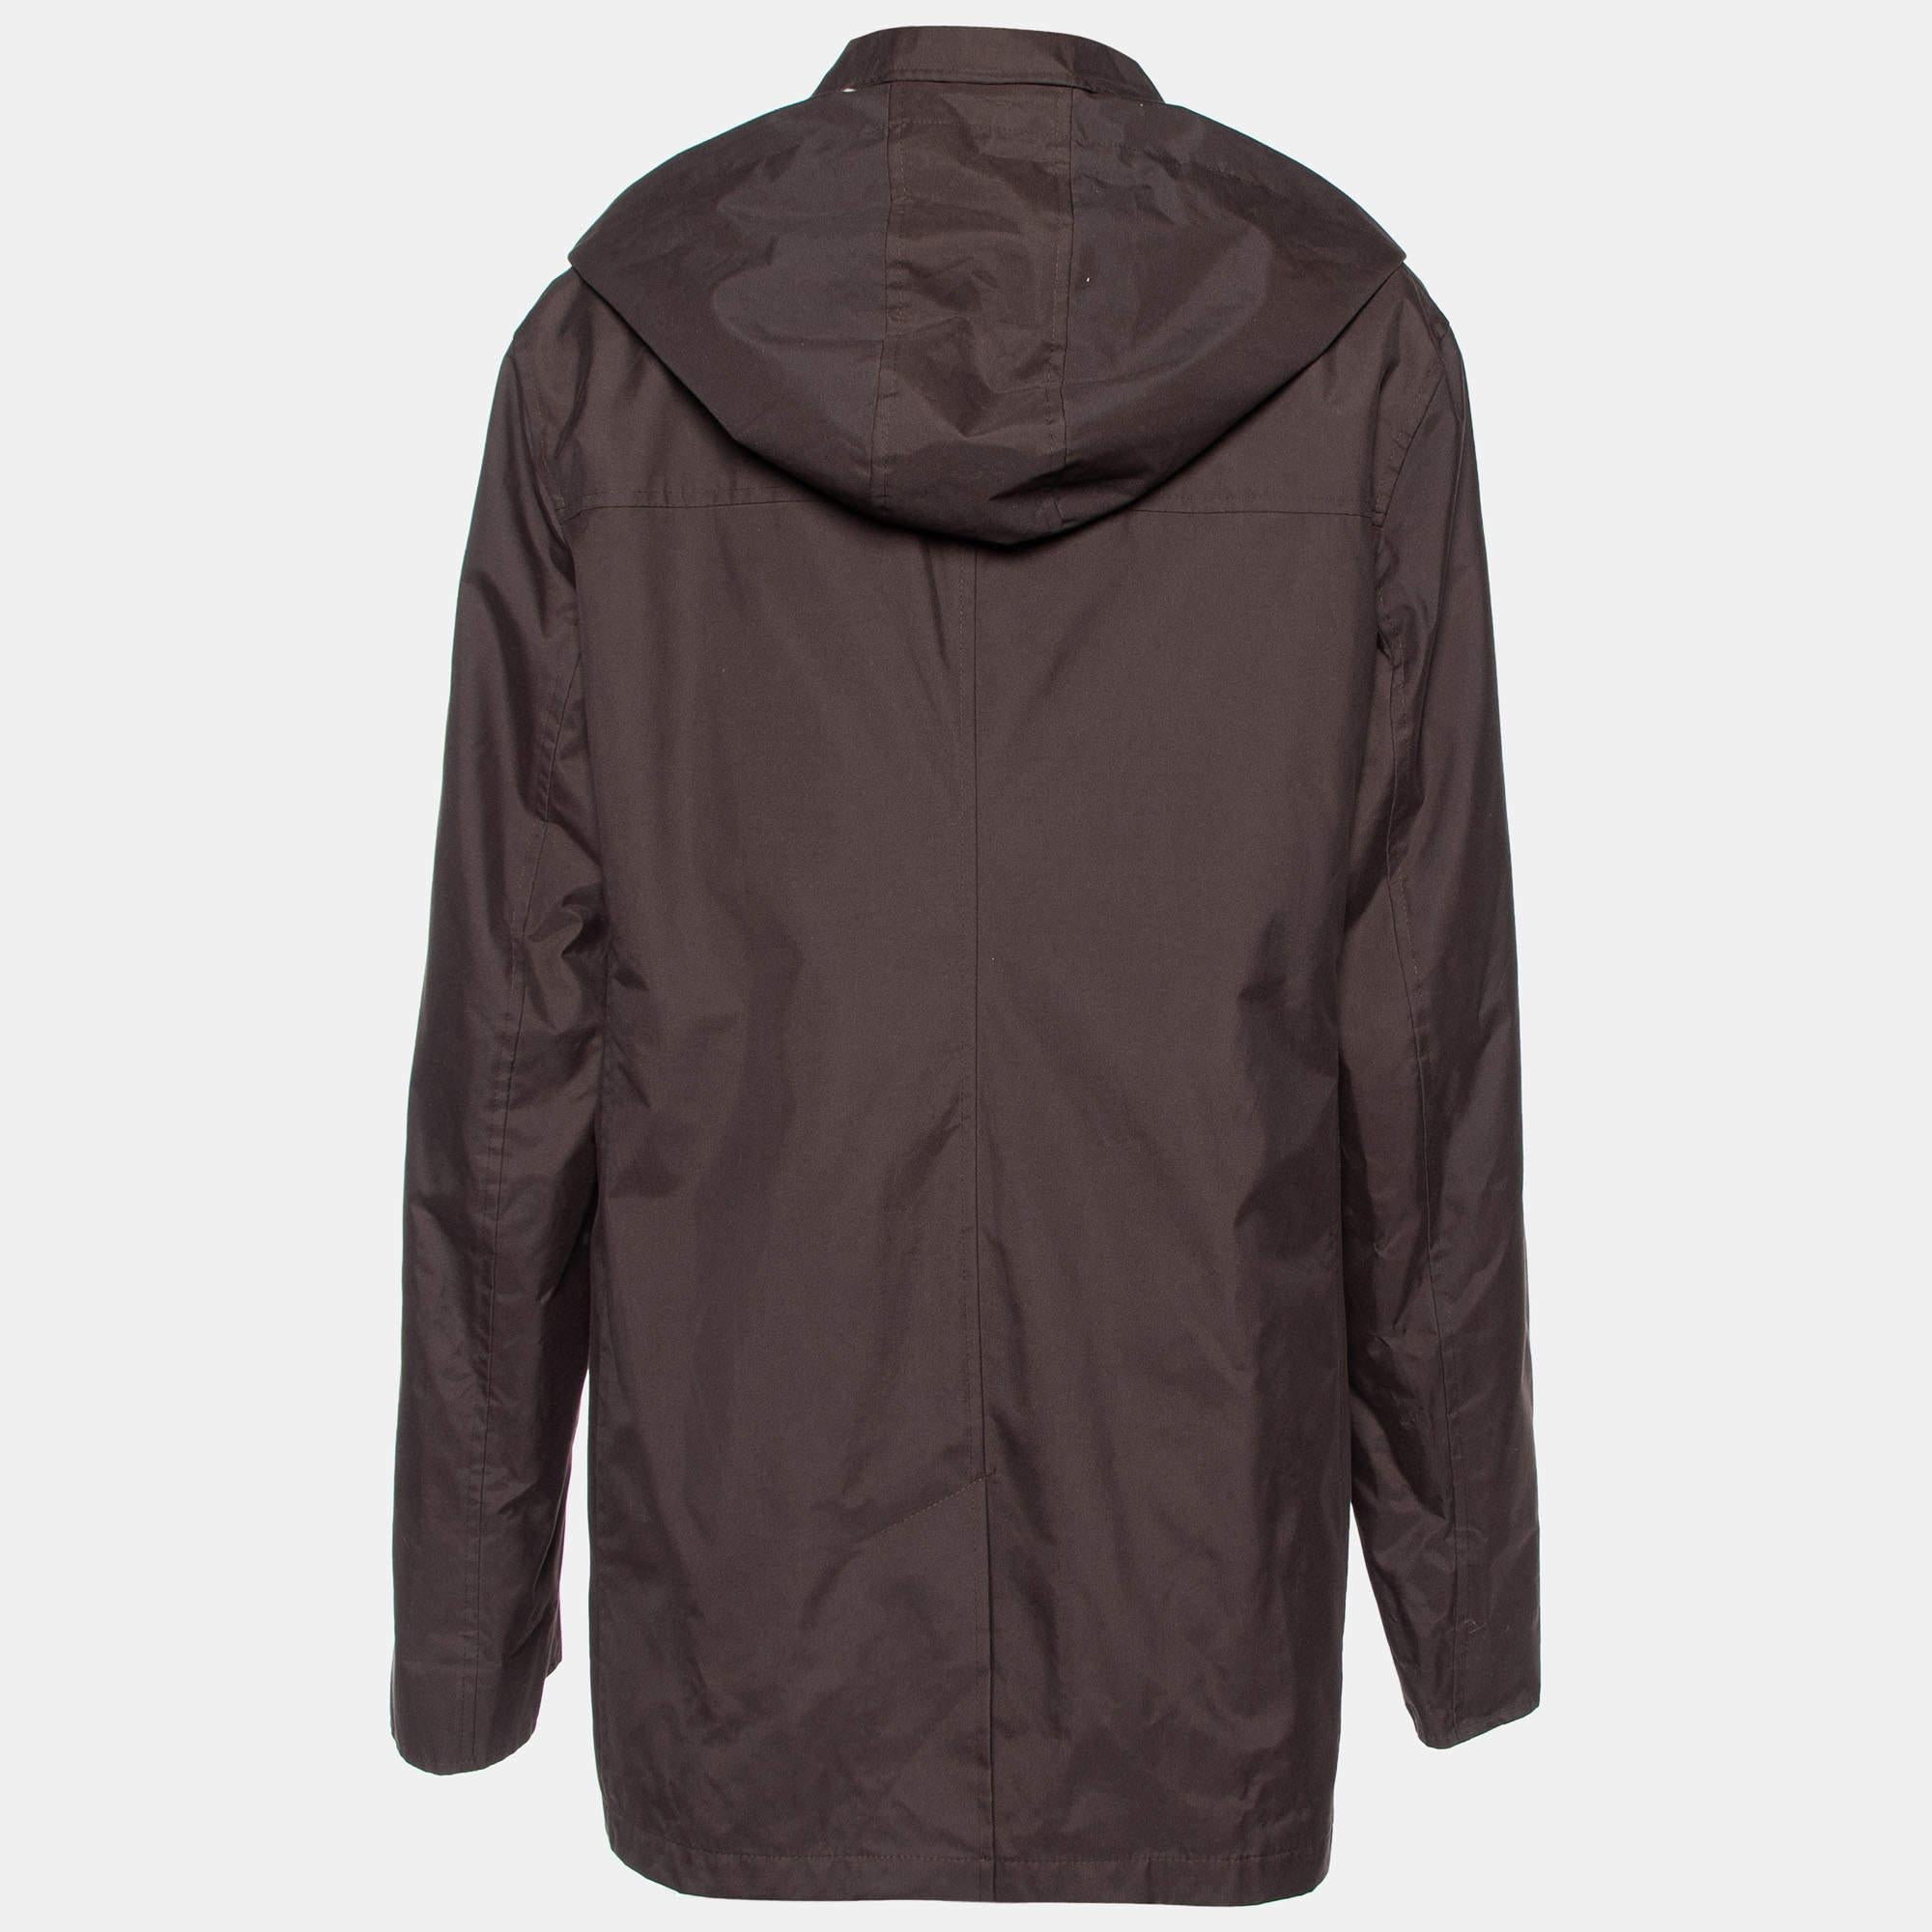 The Burberry Kayla Jacket is a stylish and functional outerwear piece. Crafted in rich brown polyester, it features a double lining for warmth, a protective hood, and the iconic Burberry design for a fashionable yet cozy cold-weather